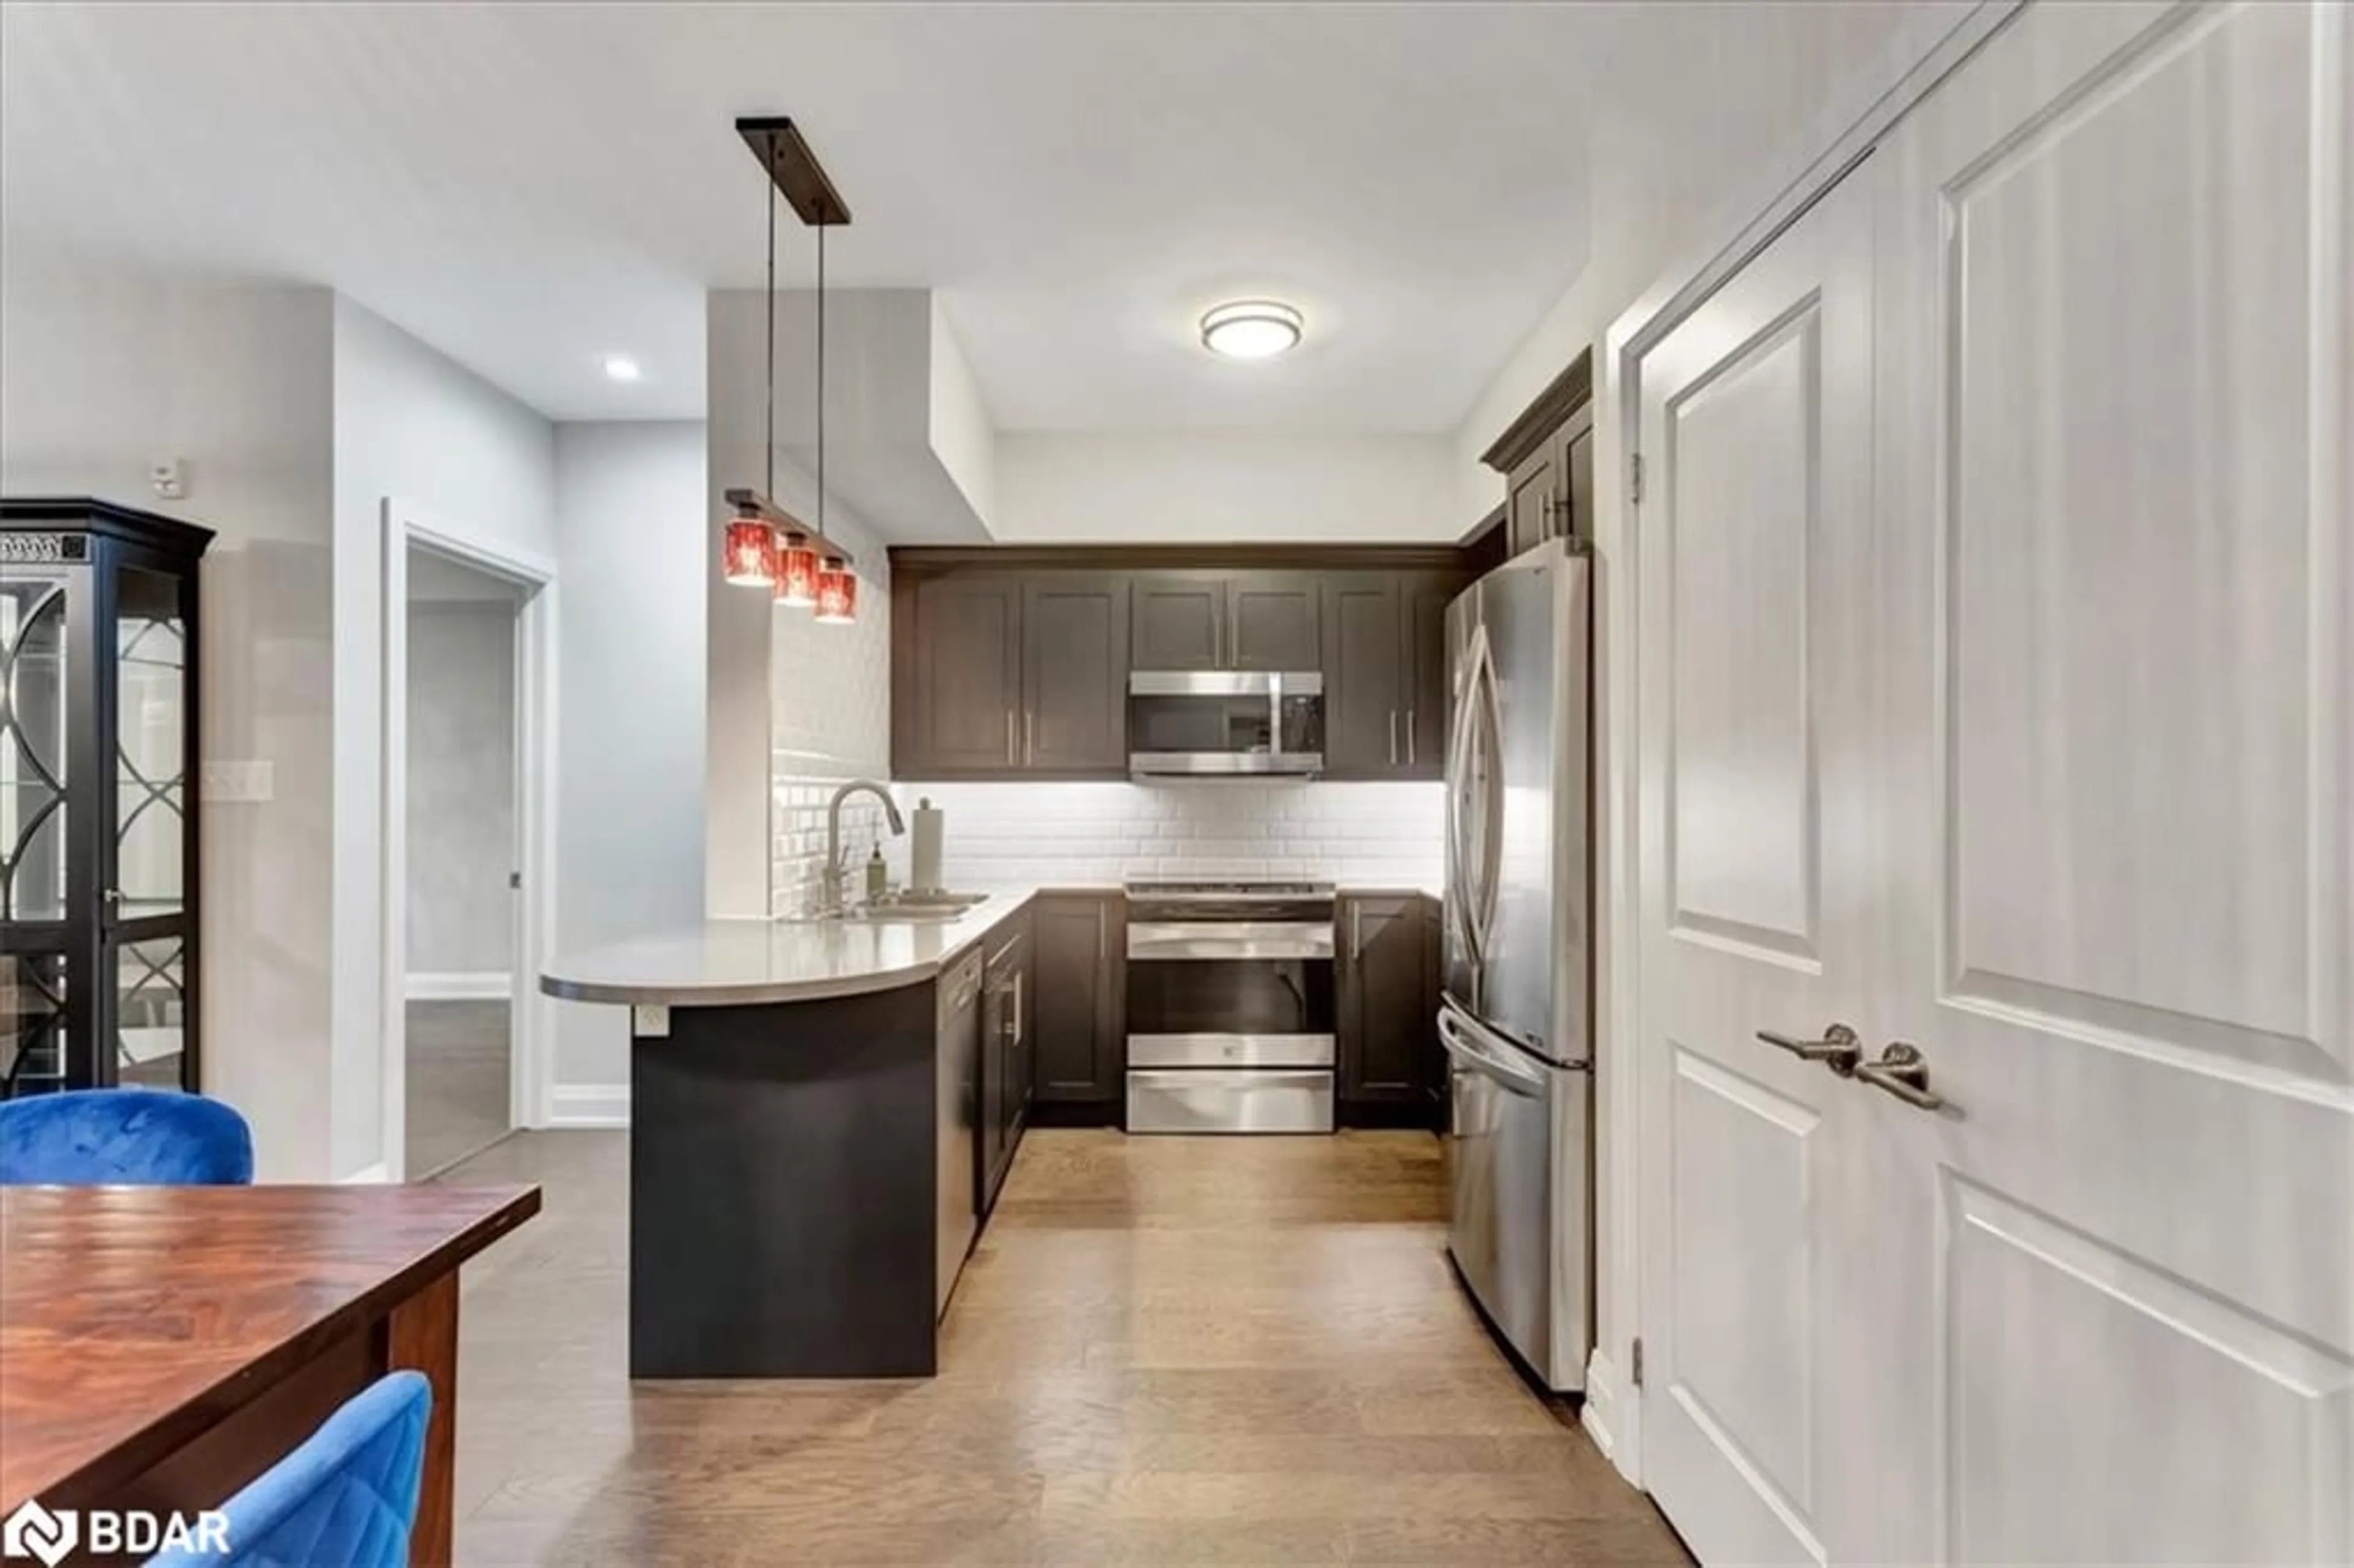 Contemporary kitchen for 720 Yonge St St #212, Barrie Ontario L9J 0G9